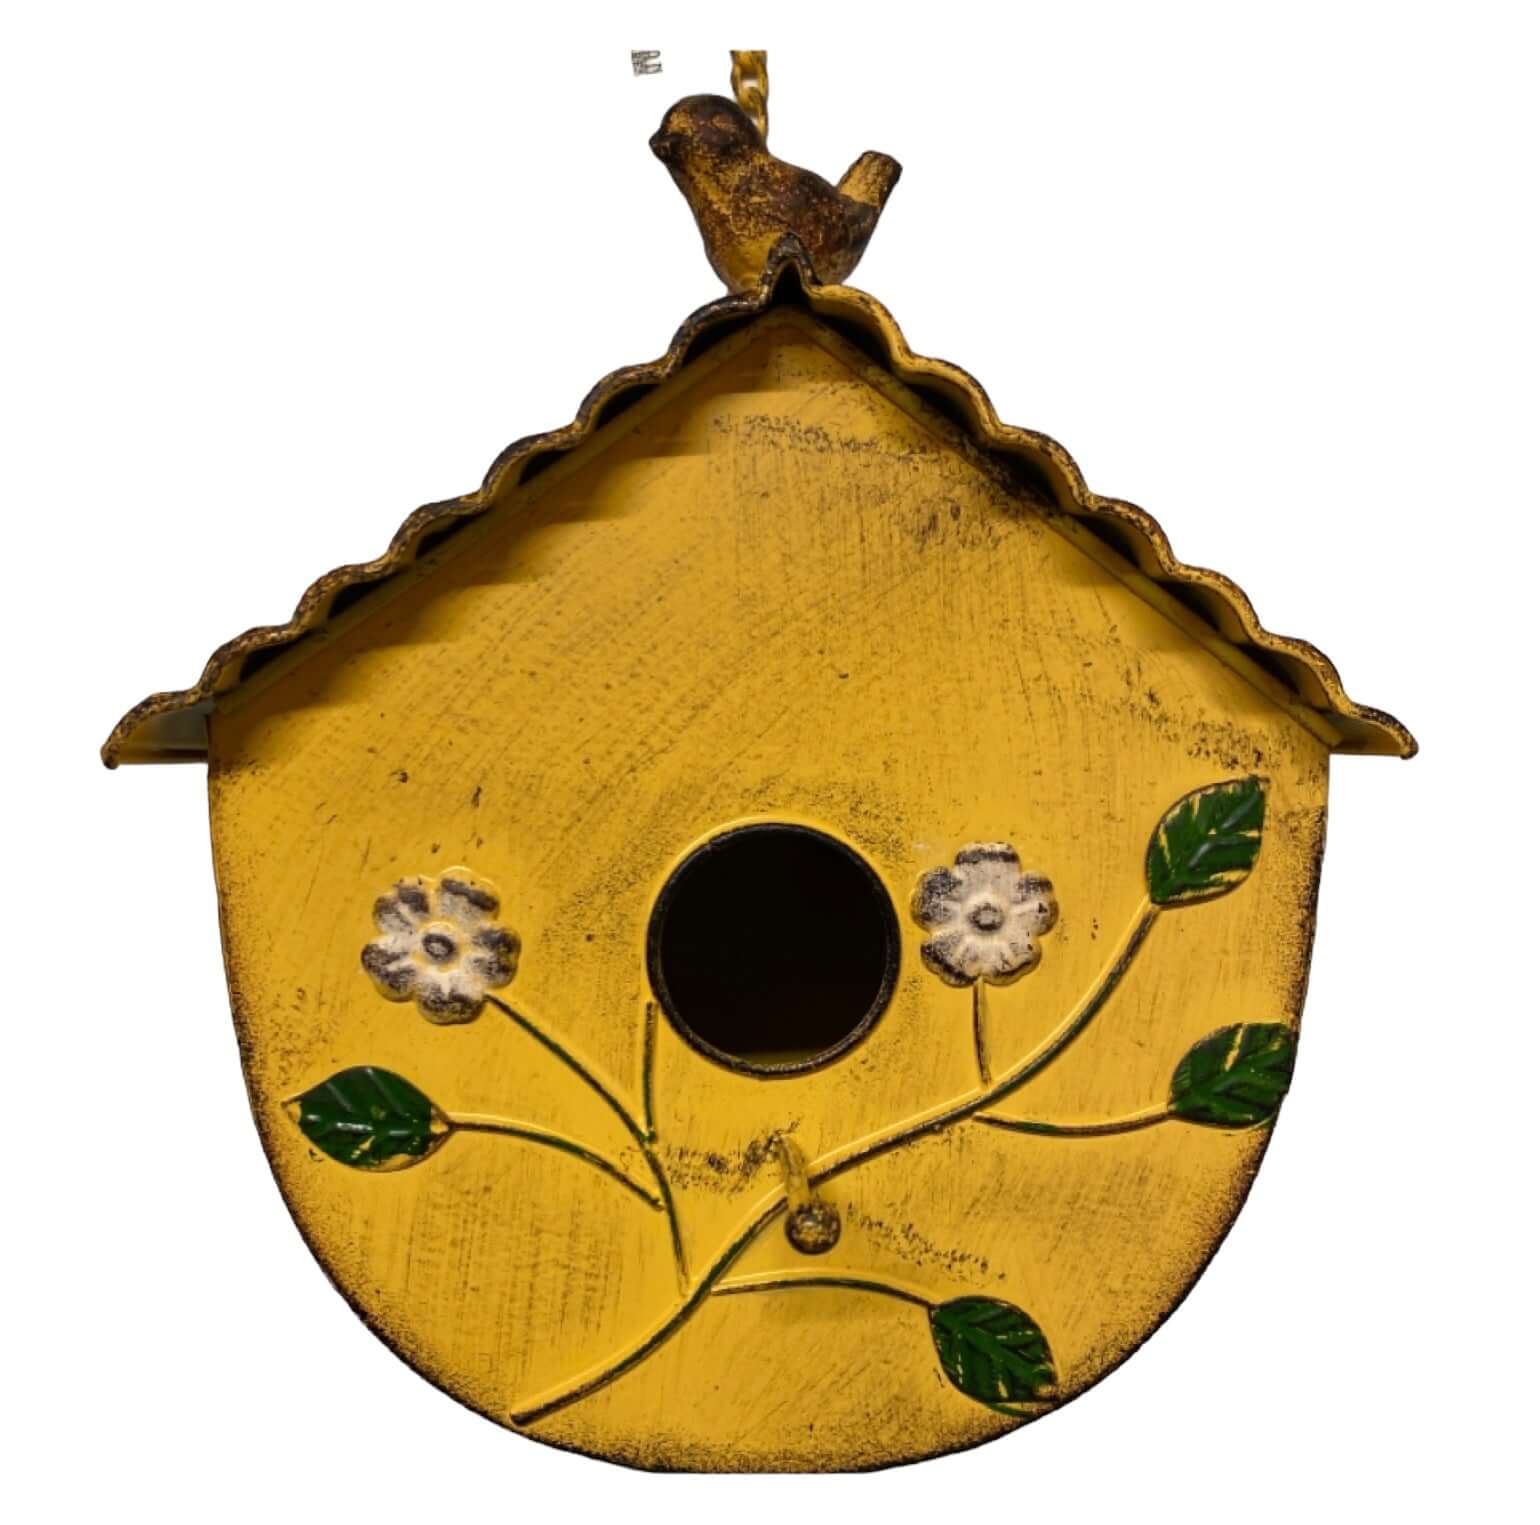 Bird House Birdhouse Vintage Yellow - The Renmy Store Homewares & Gifts 